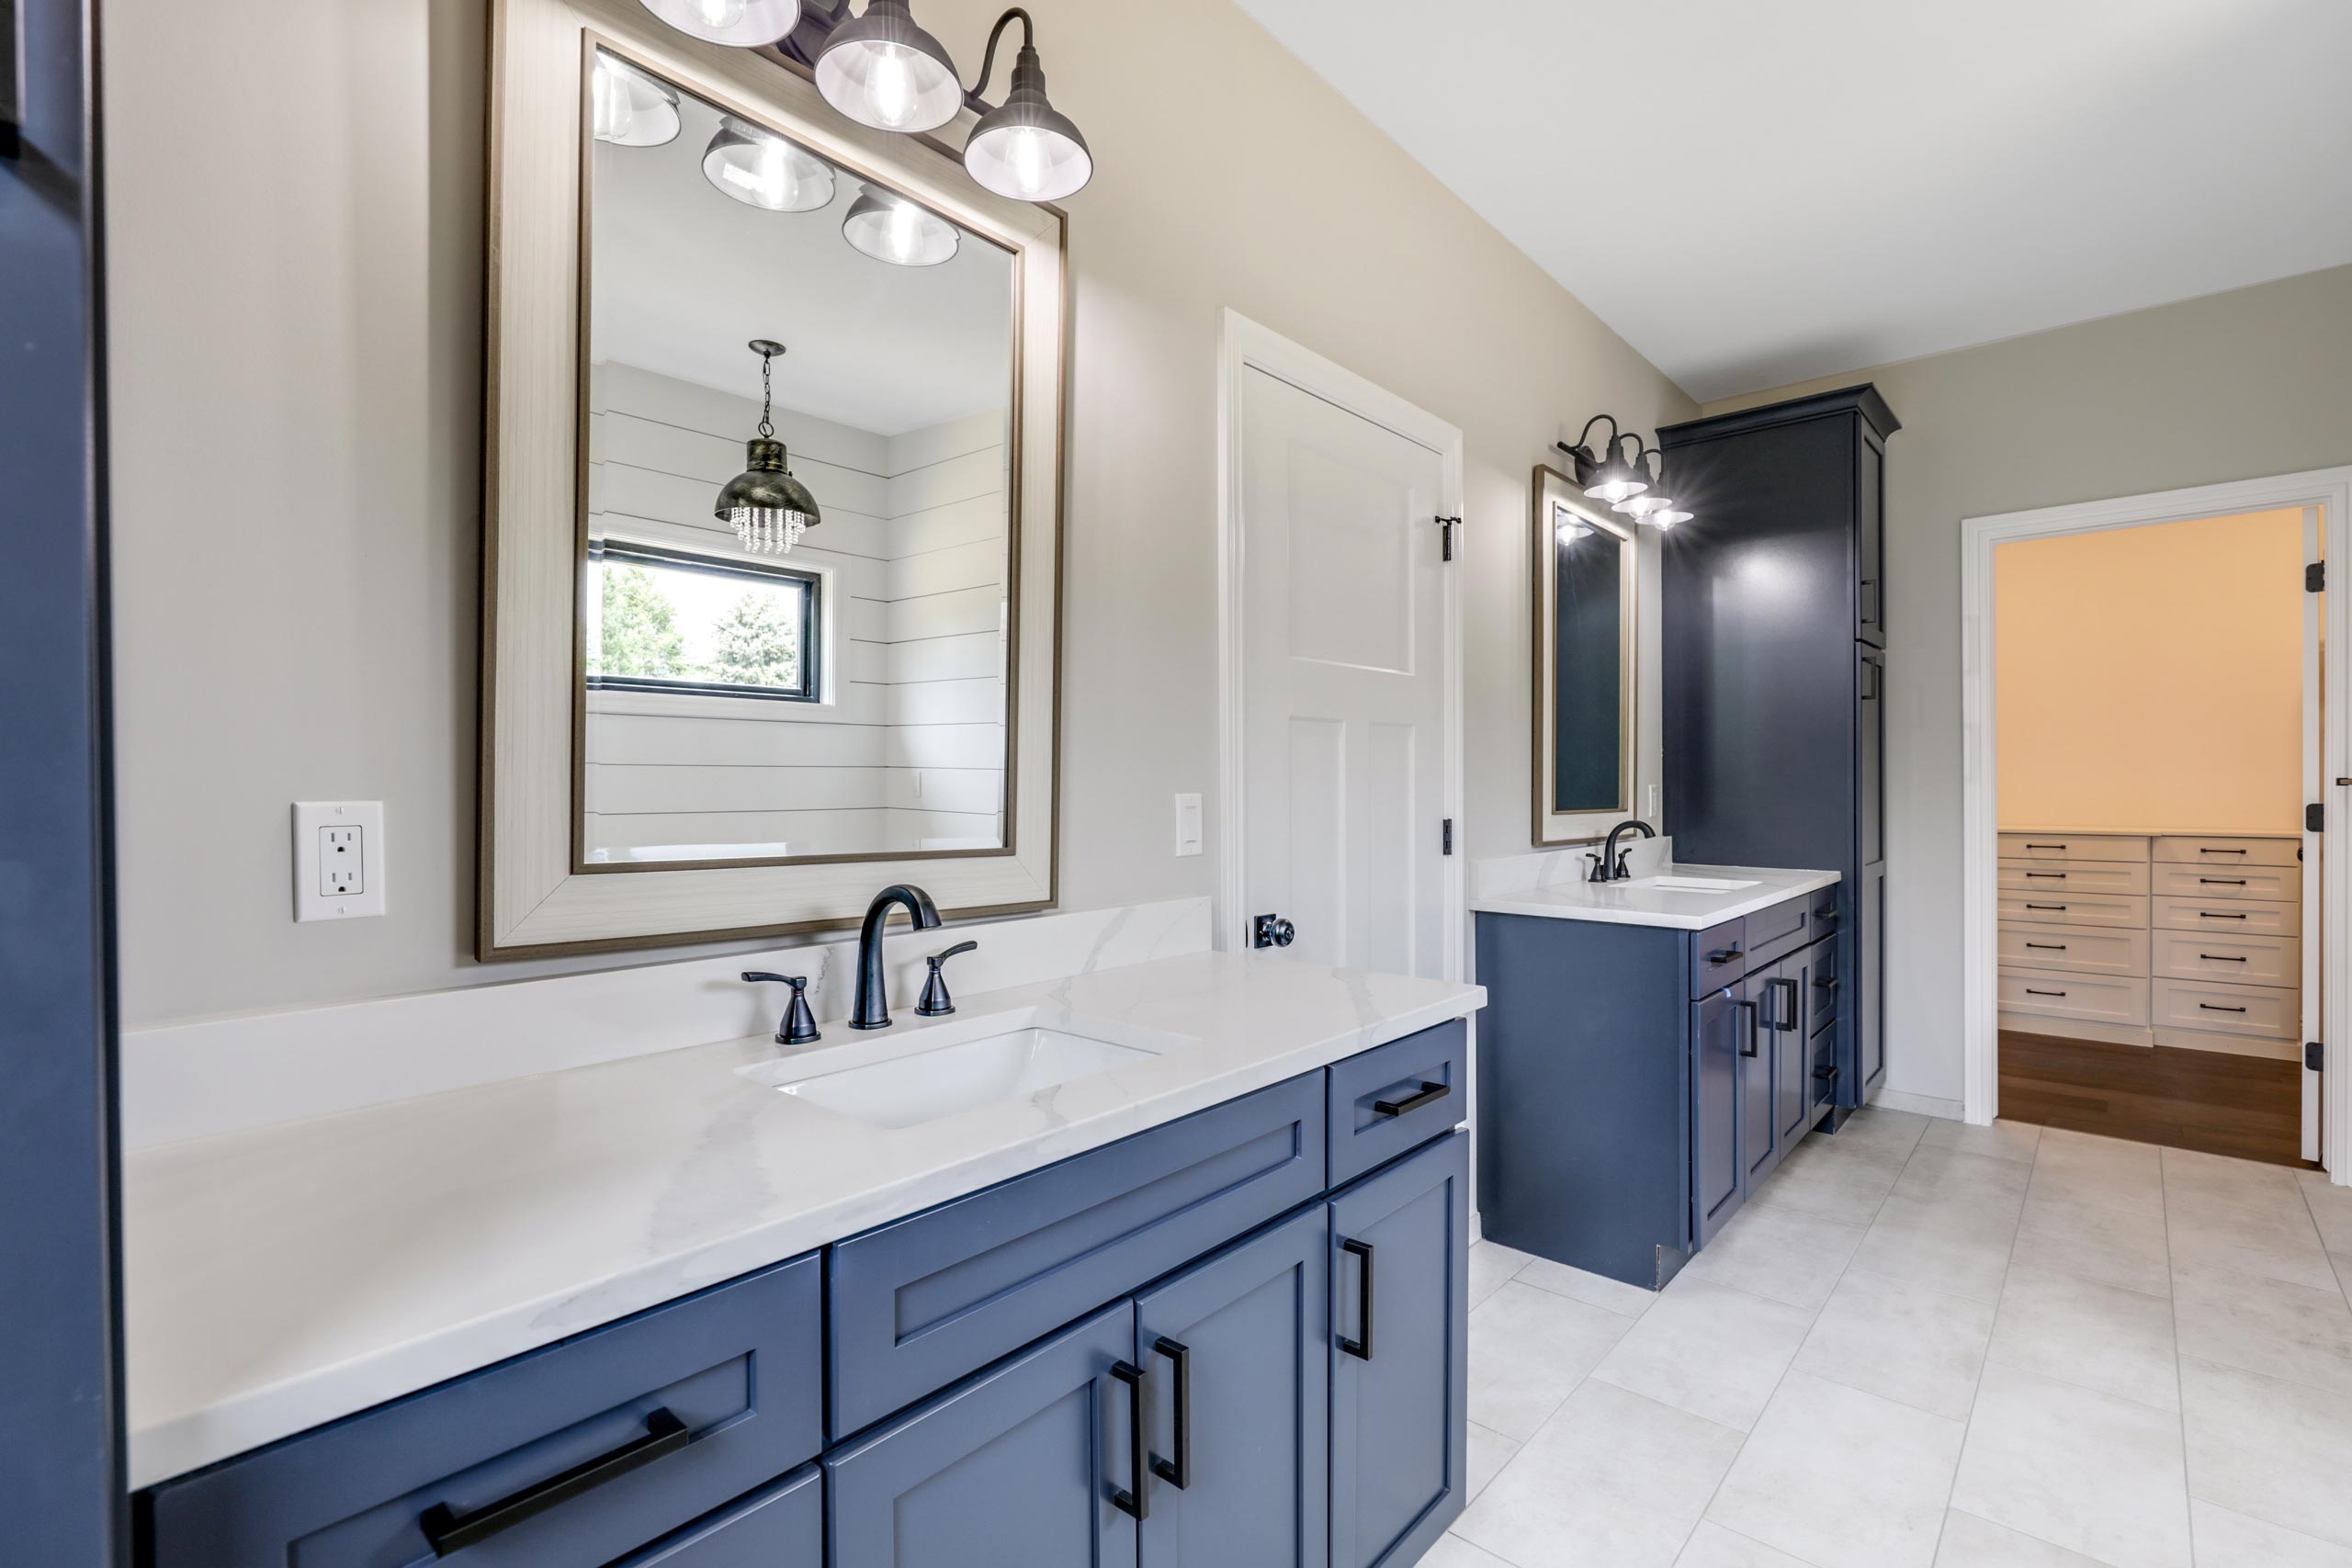 Woodline Building Company Project: Contemporary Farmhouse Interior Master Bath Full View With Closet